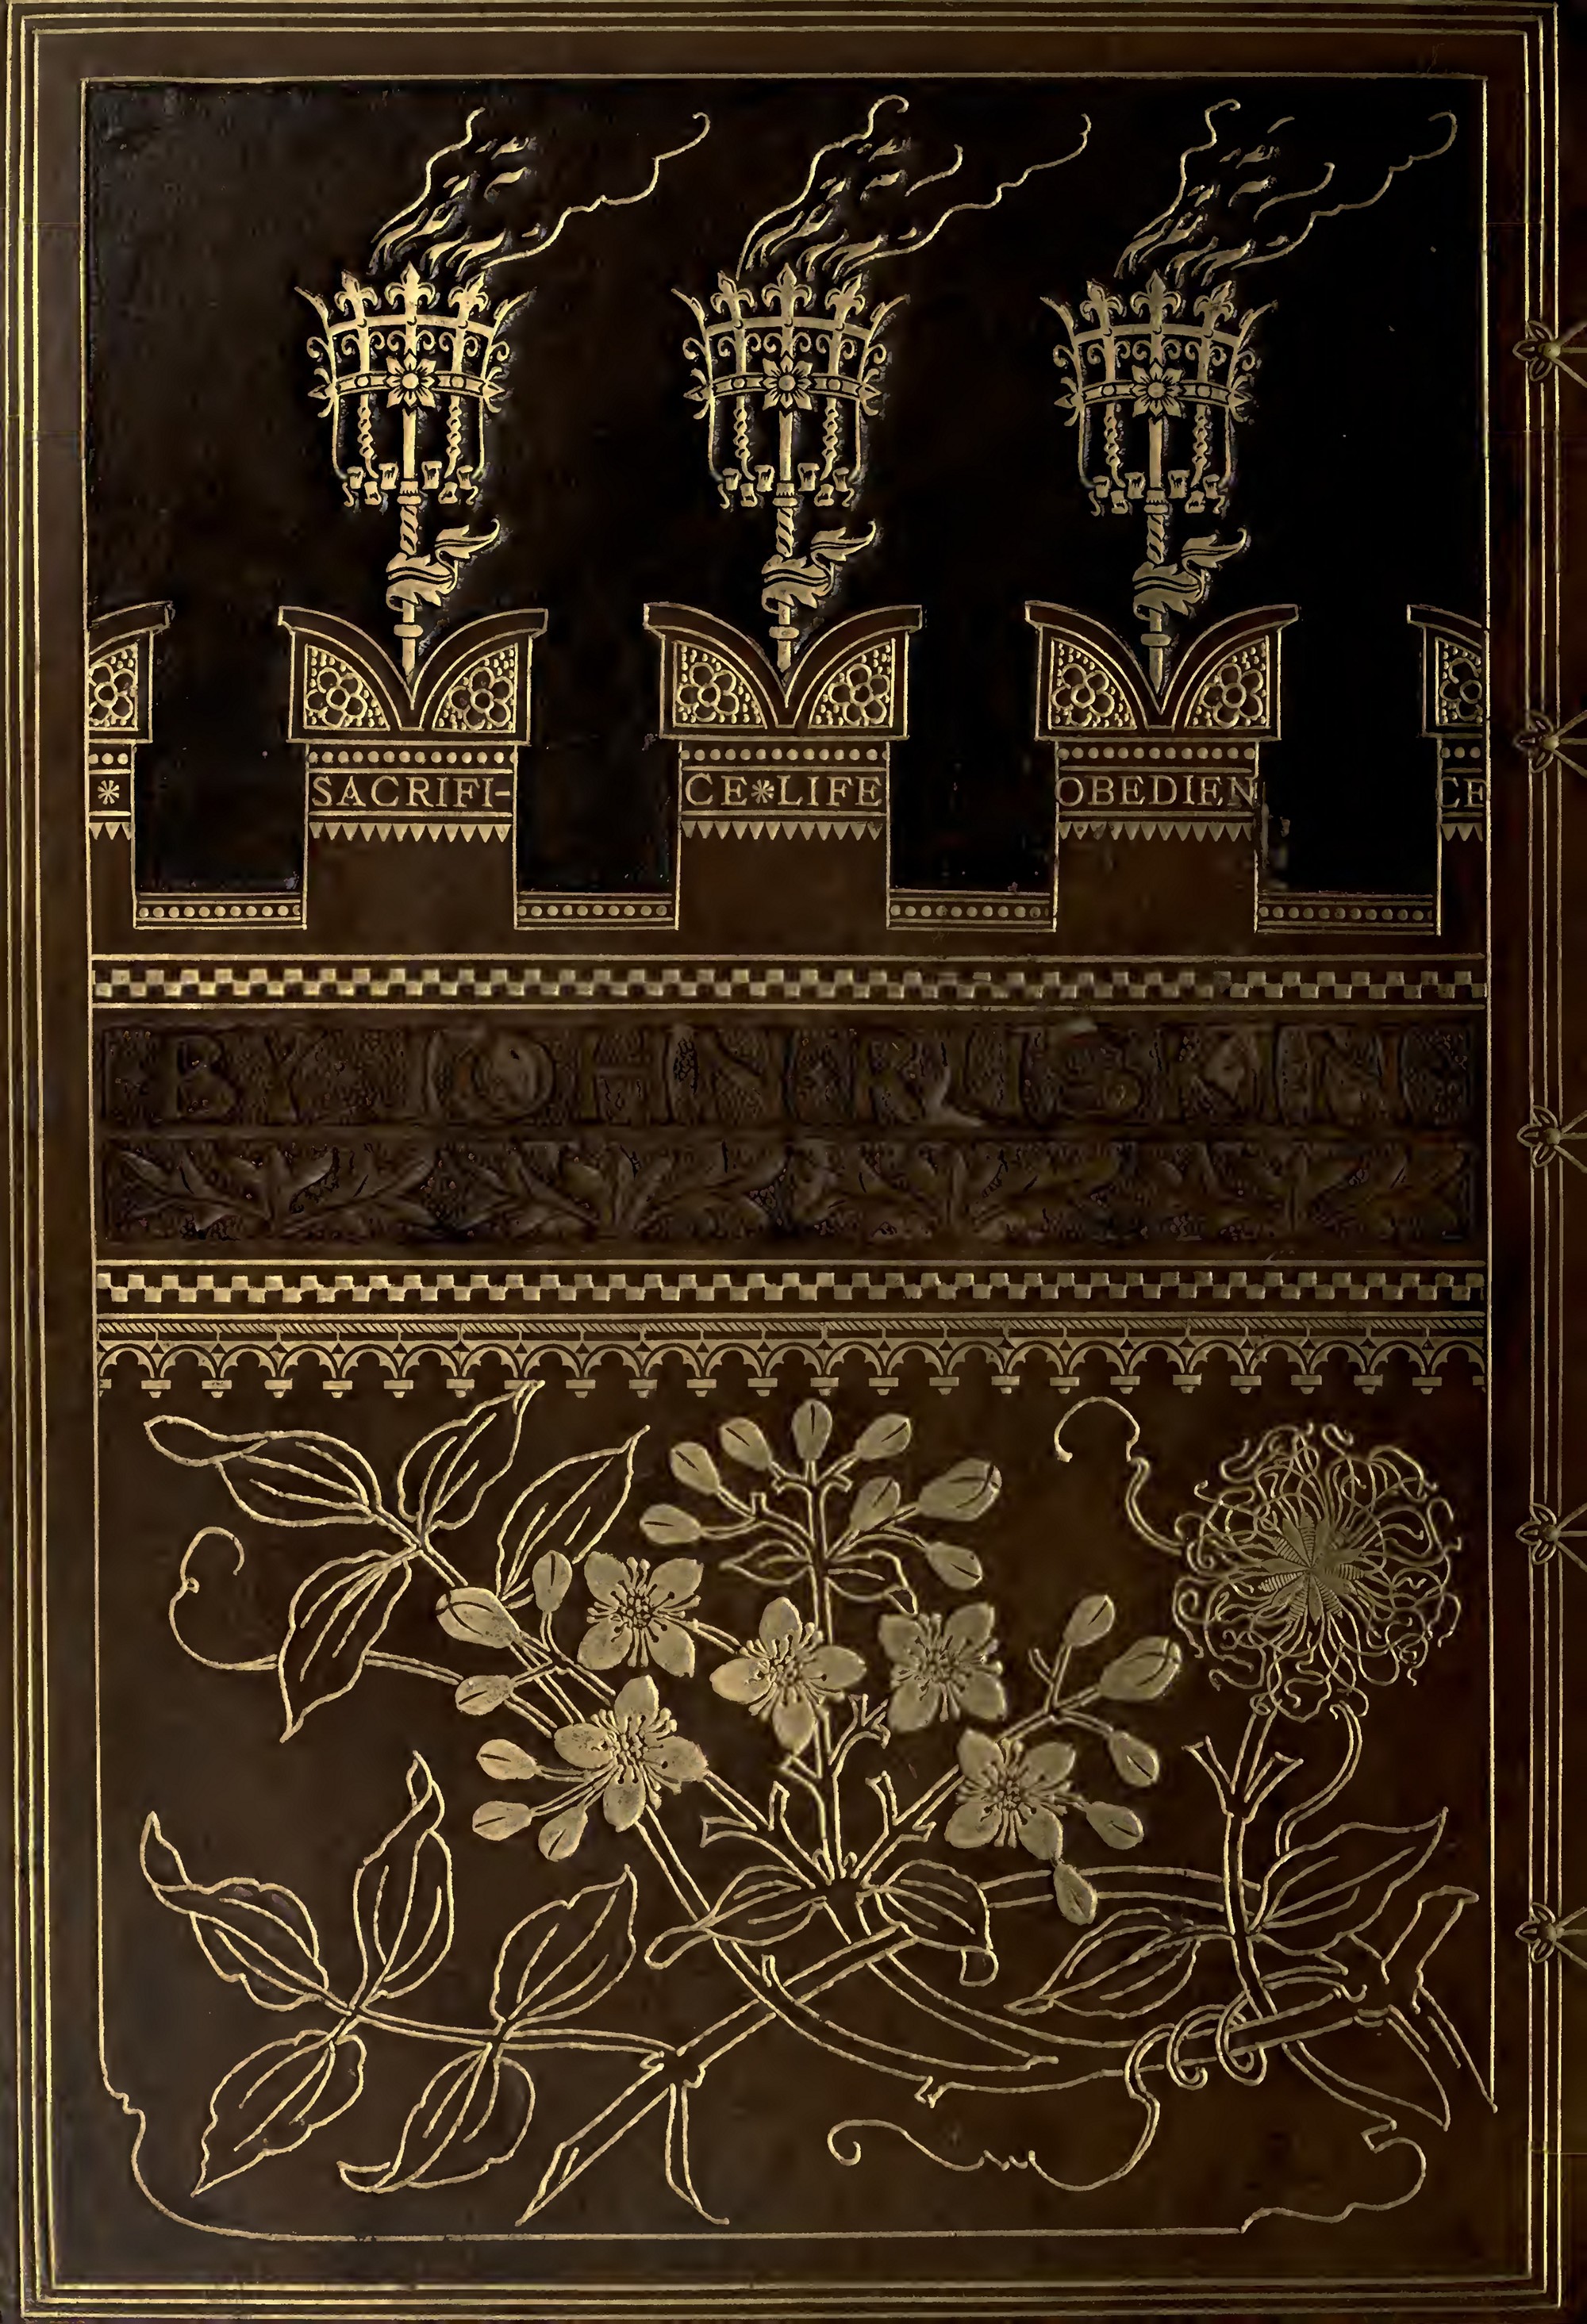 The Seven Lamps of Architecture : with illustrations, drawn by the author / by John Ruskin, honorary student of Christ church, and honorary fellow of Corpus Christi college, Oxford, etc., etc. — Sixth edition. — Sunnyside, Orpington, Kent : Published by George Allen, 1889